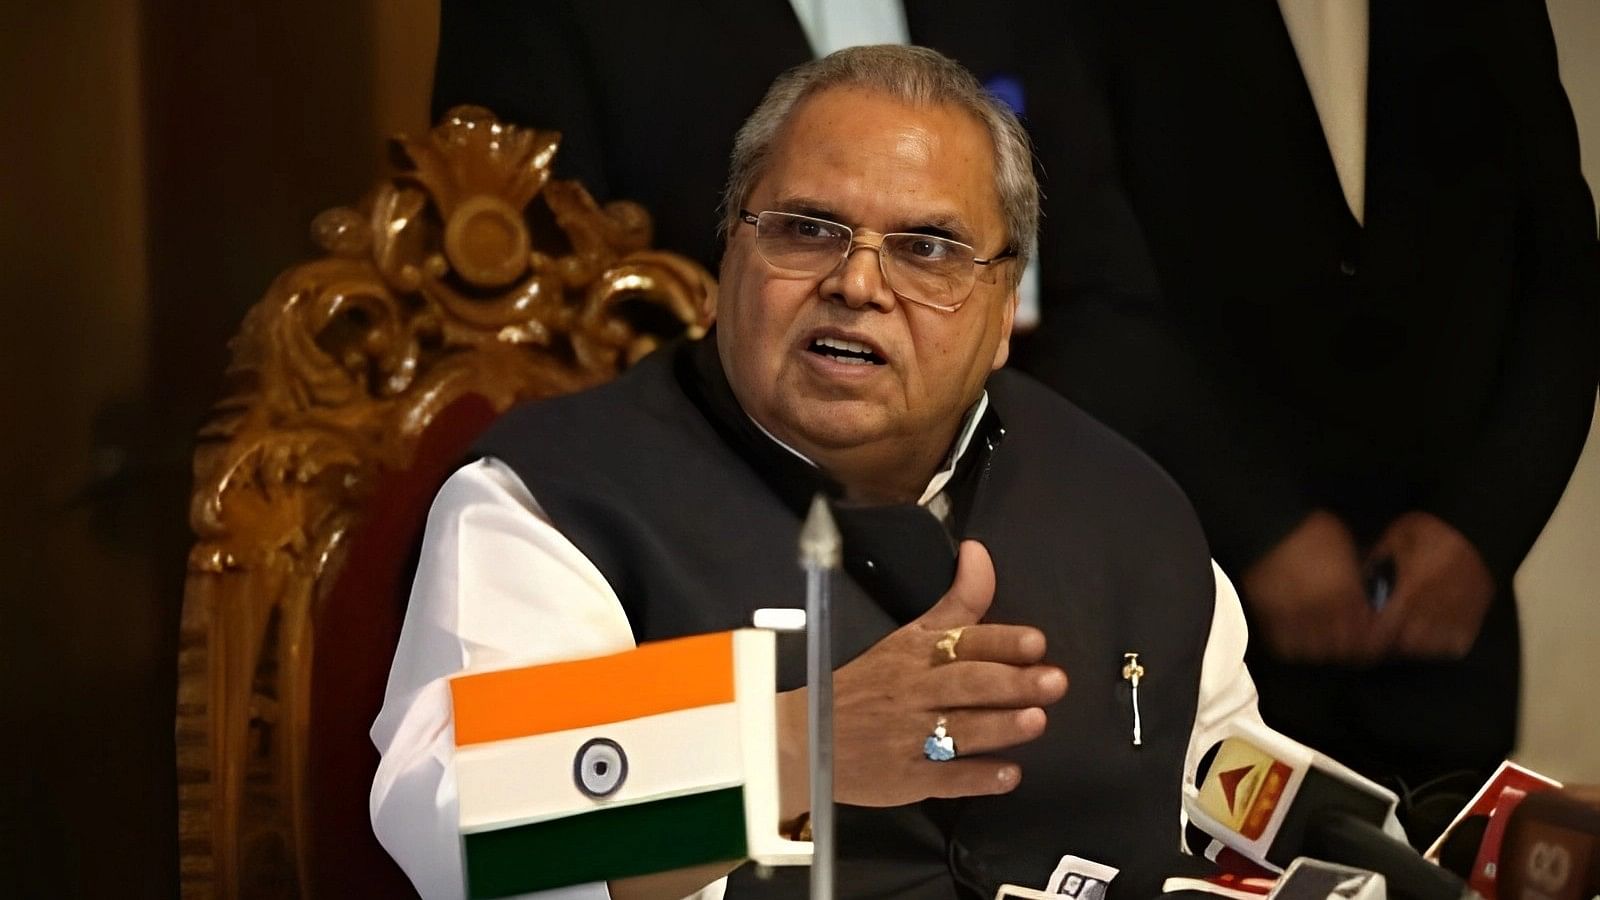 <div class="paragraphs"><p>Former Jammu and Kashmir Governor Satyapal Malik has been issued a notice by the Central Bureau of Investigation (CBI) in connection with an alleged insurance scam, Malik said on Friday, 21 April.</p></div>